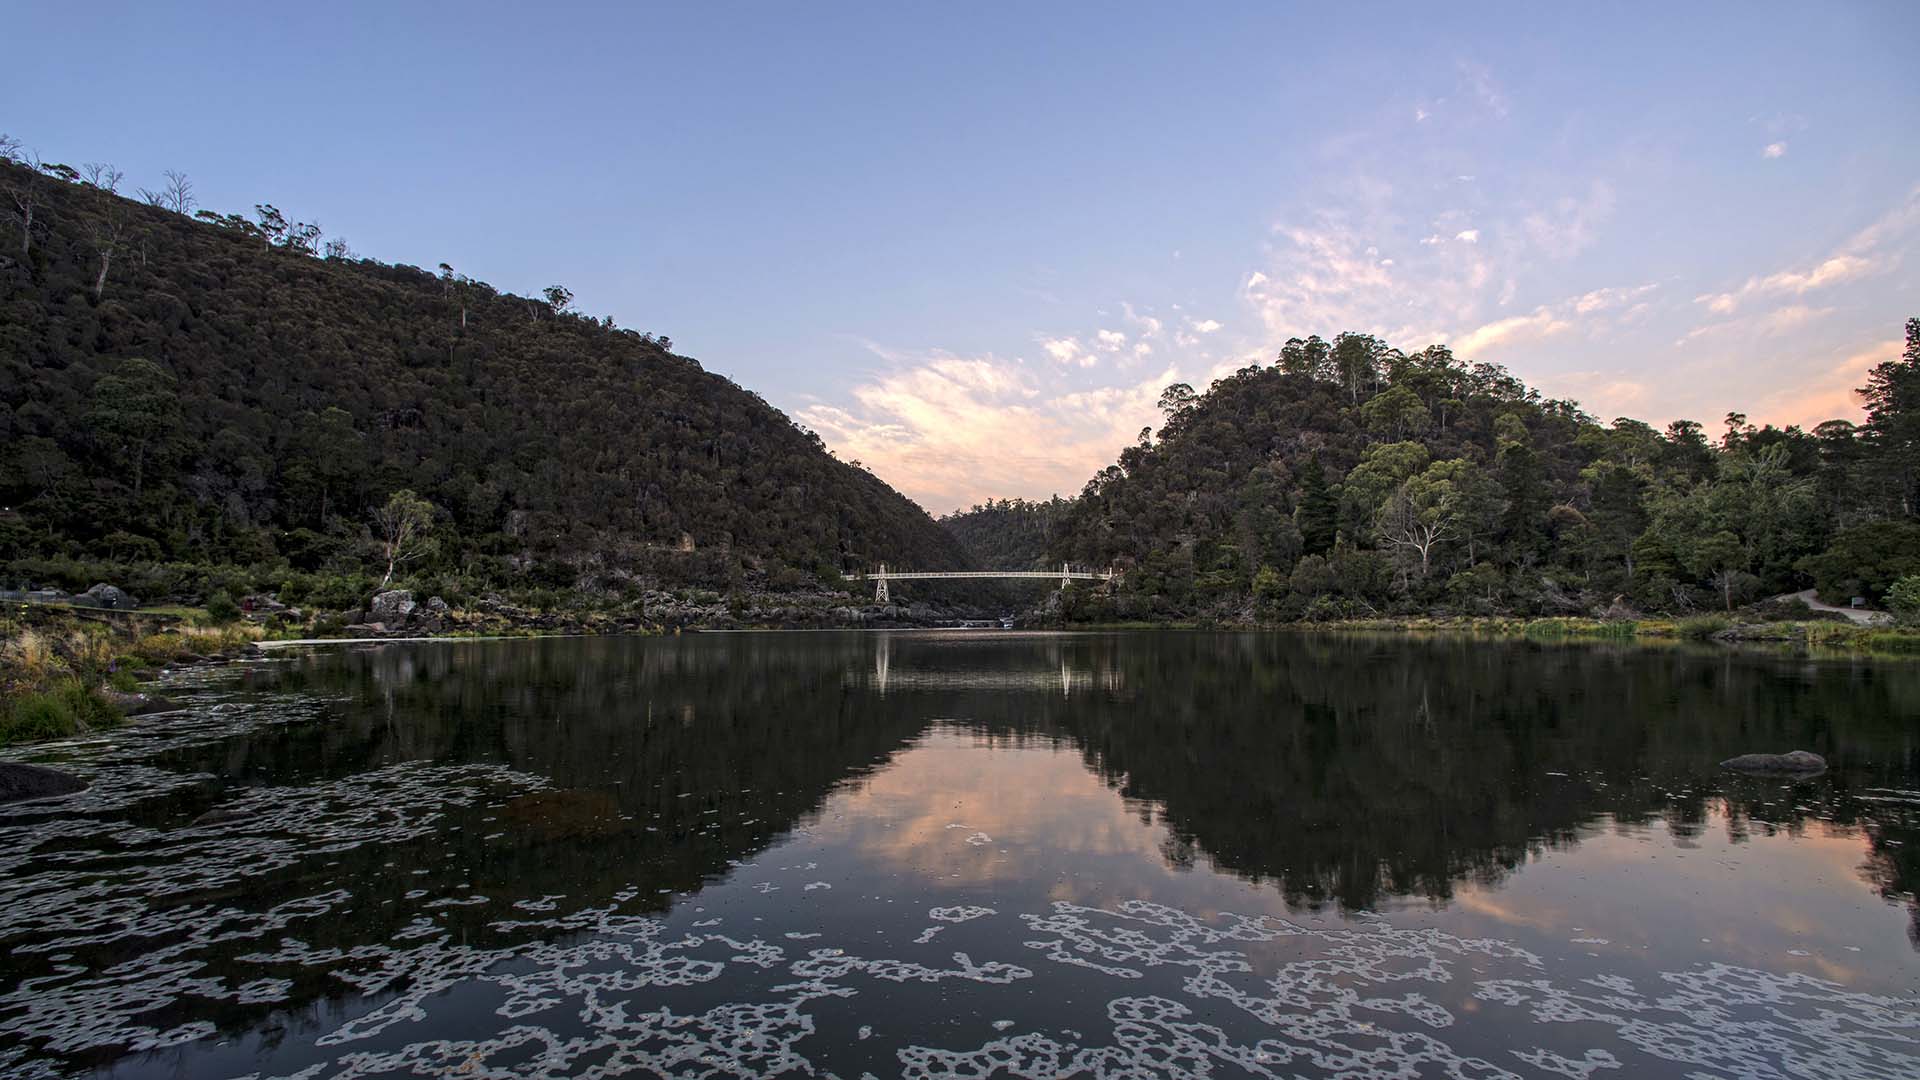 Mona Foma's 2021 Festival Will Fill Launceston's Cataract Gorge with a Light and Laser Show